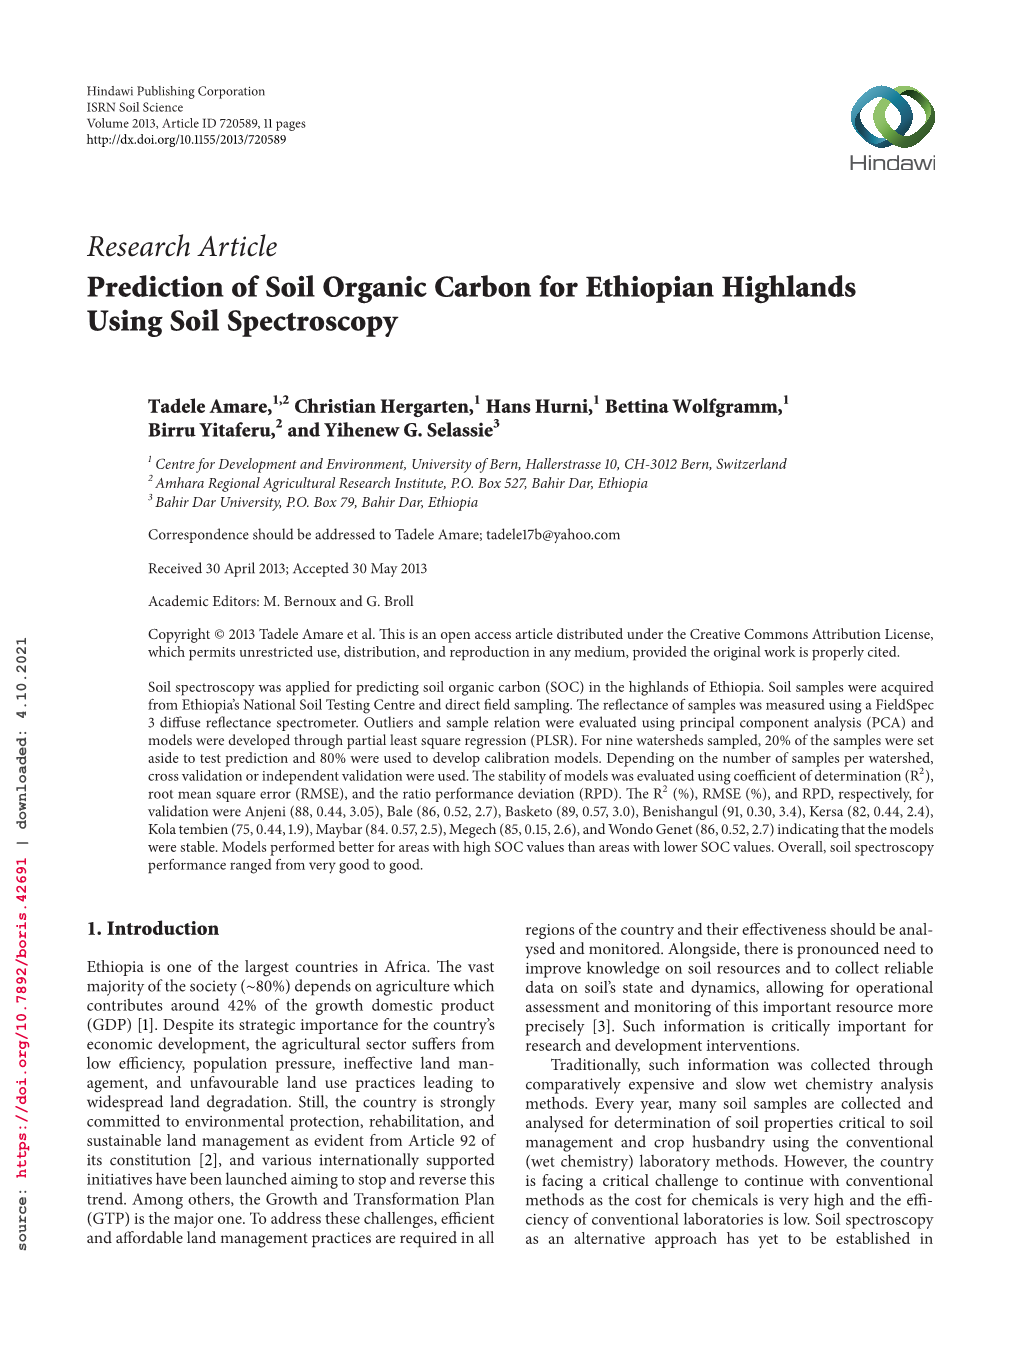 Research Article Prediction of Soil Organic Carbon for Ethiopian Highlands Using Soil Spectroscopy